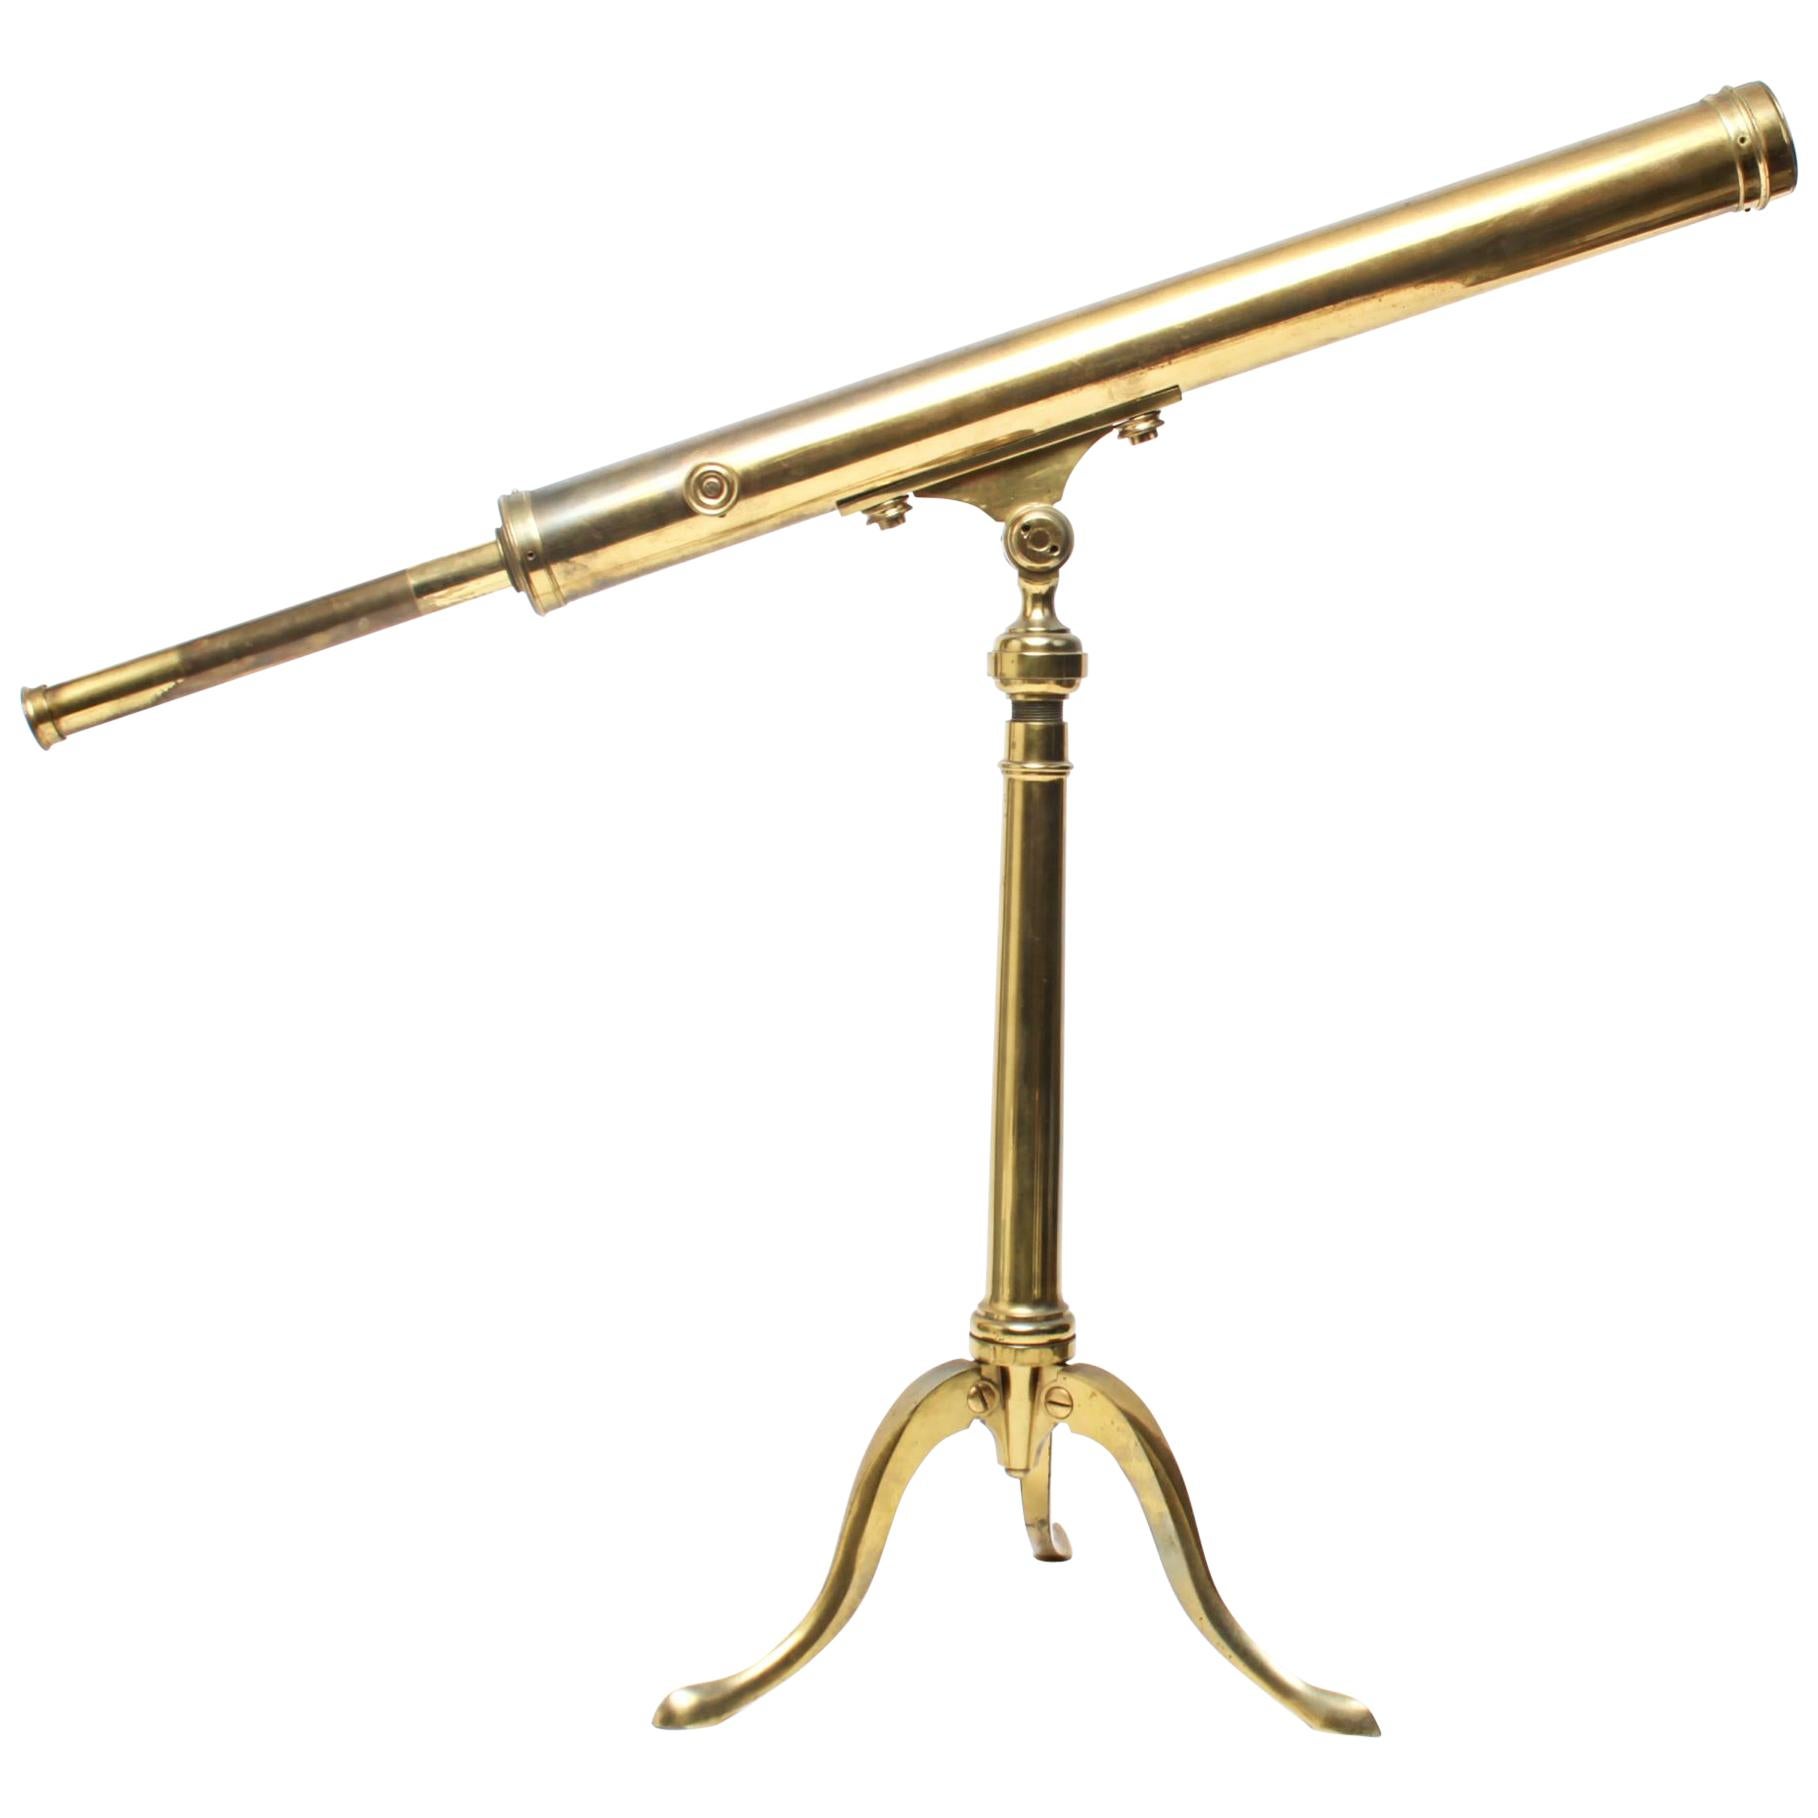 English Tabletop Telescope in Solid Brass